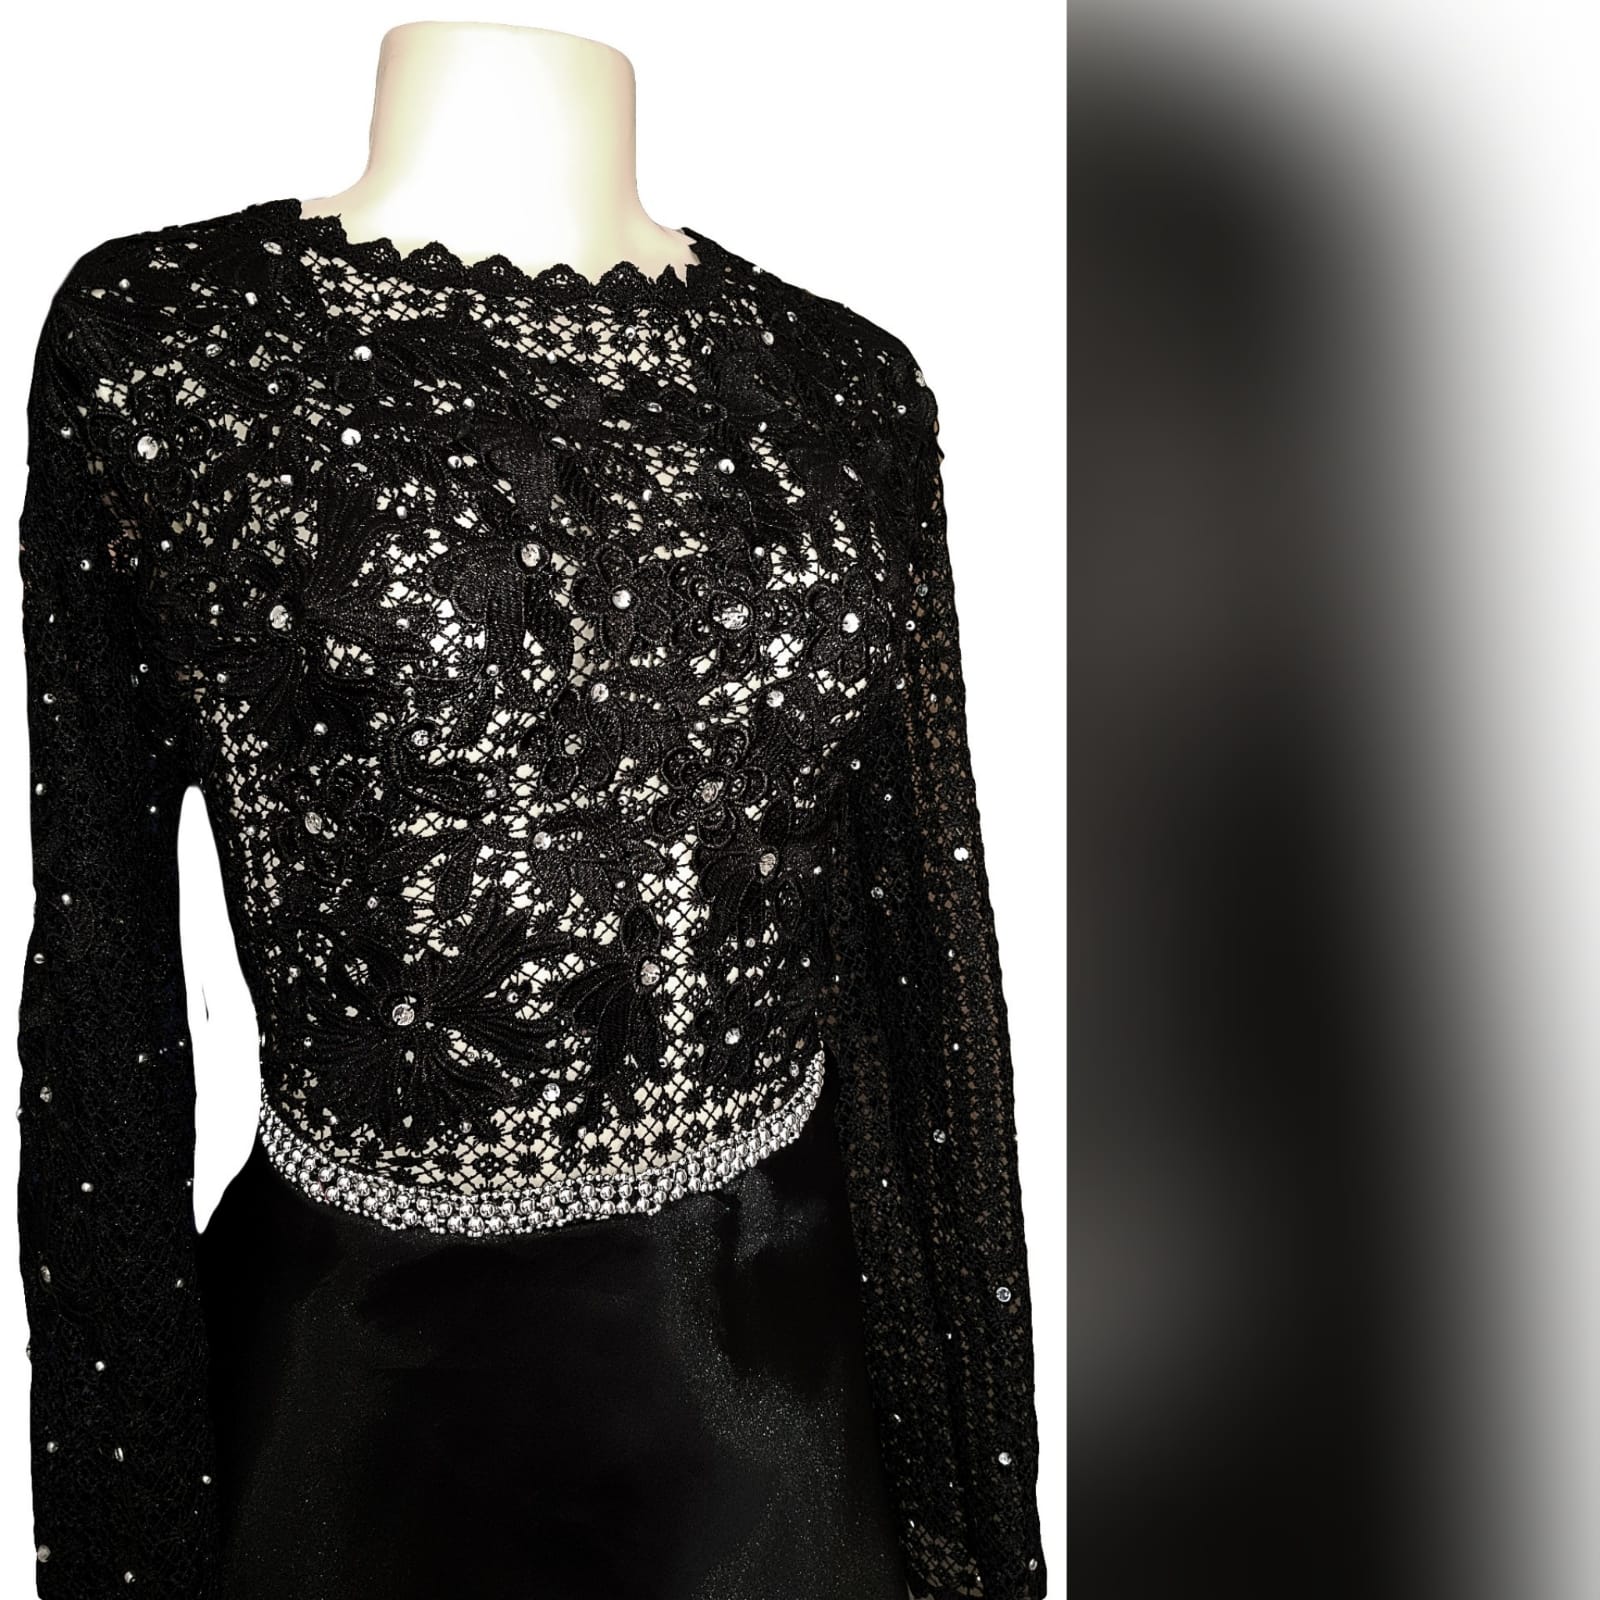 Black prom dress with a lace bodice 4 an elegant design created for a prom night. Black prom dress with a lace bodice with a slight sheer look detailed with silver beads and waist belt. Round neckline and long sleeves bottom flowy in a bridal organza